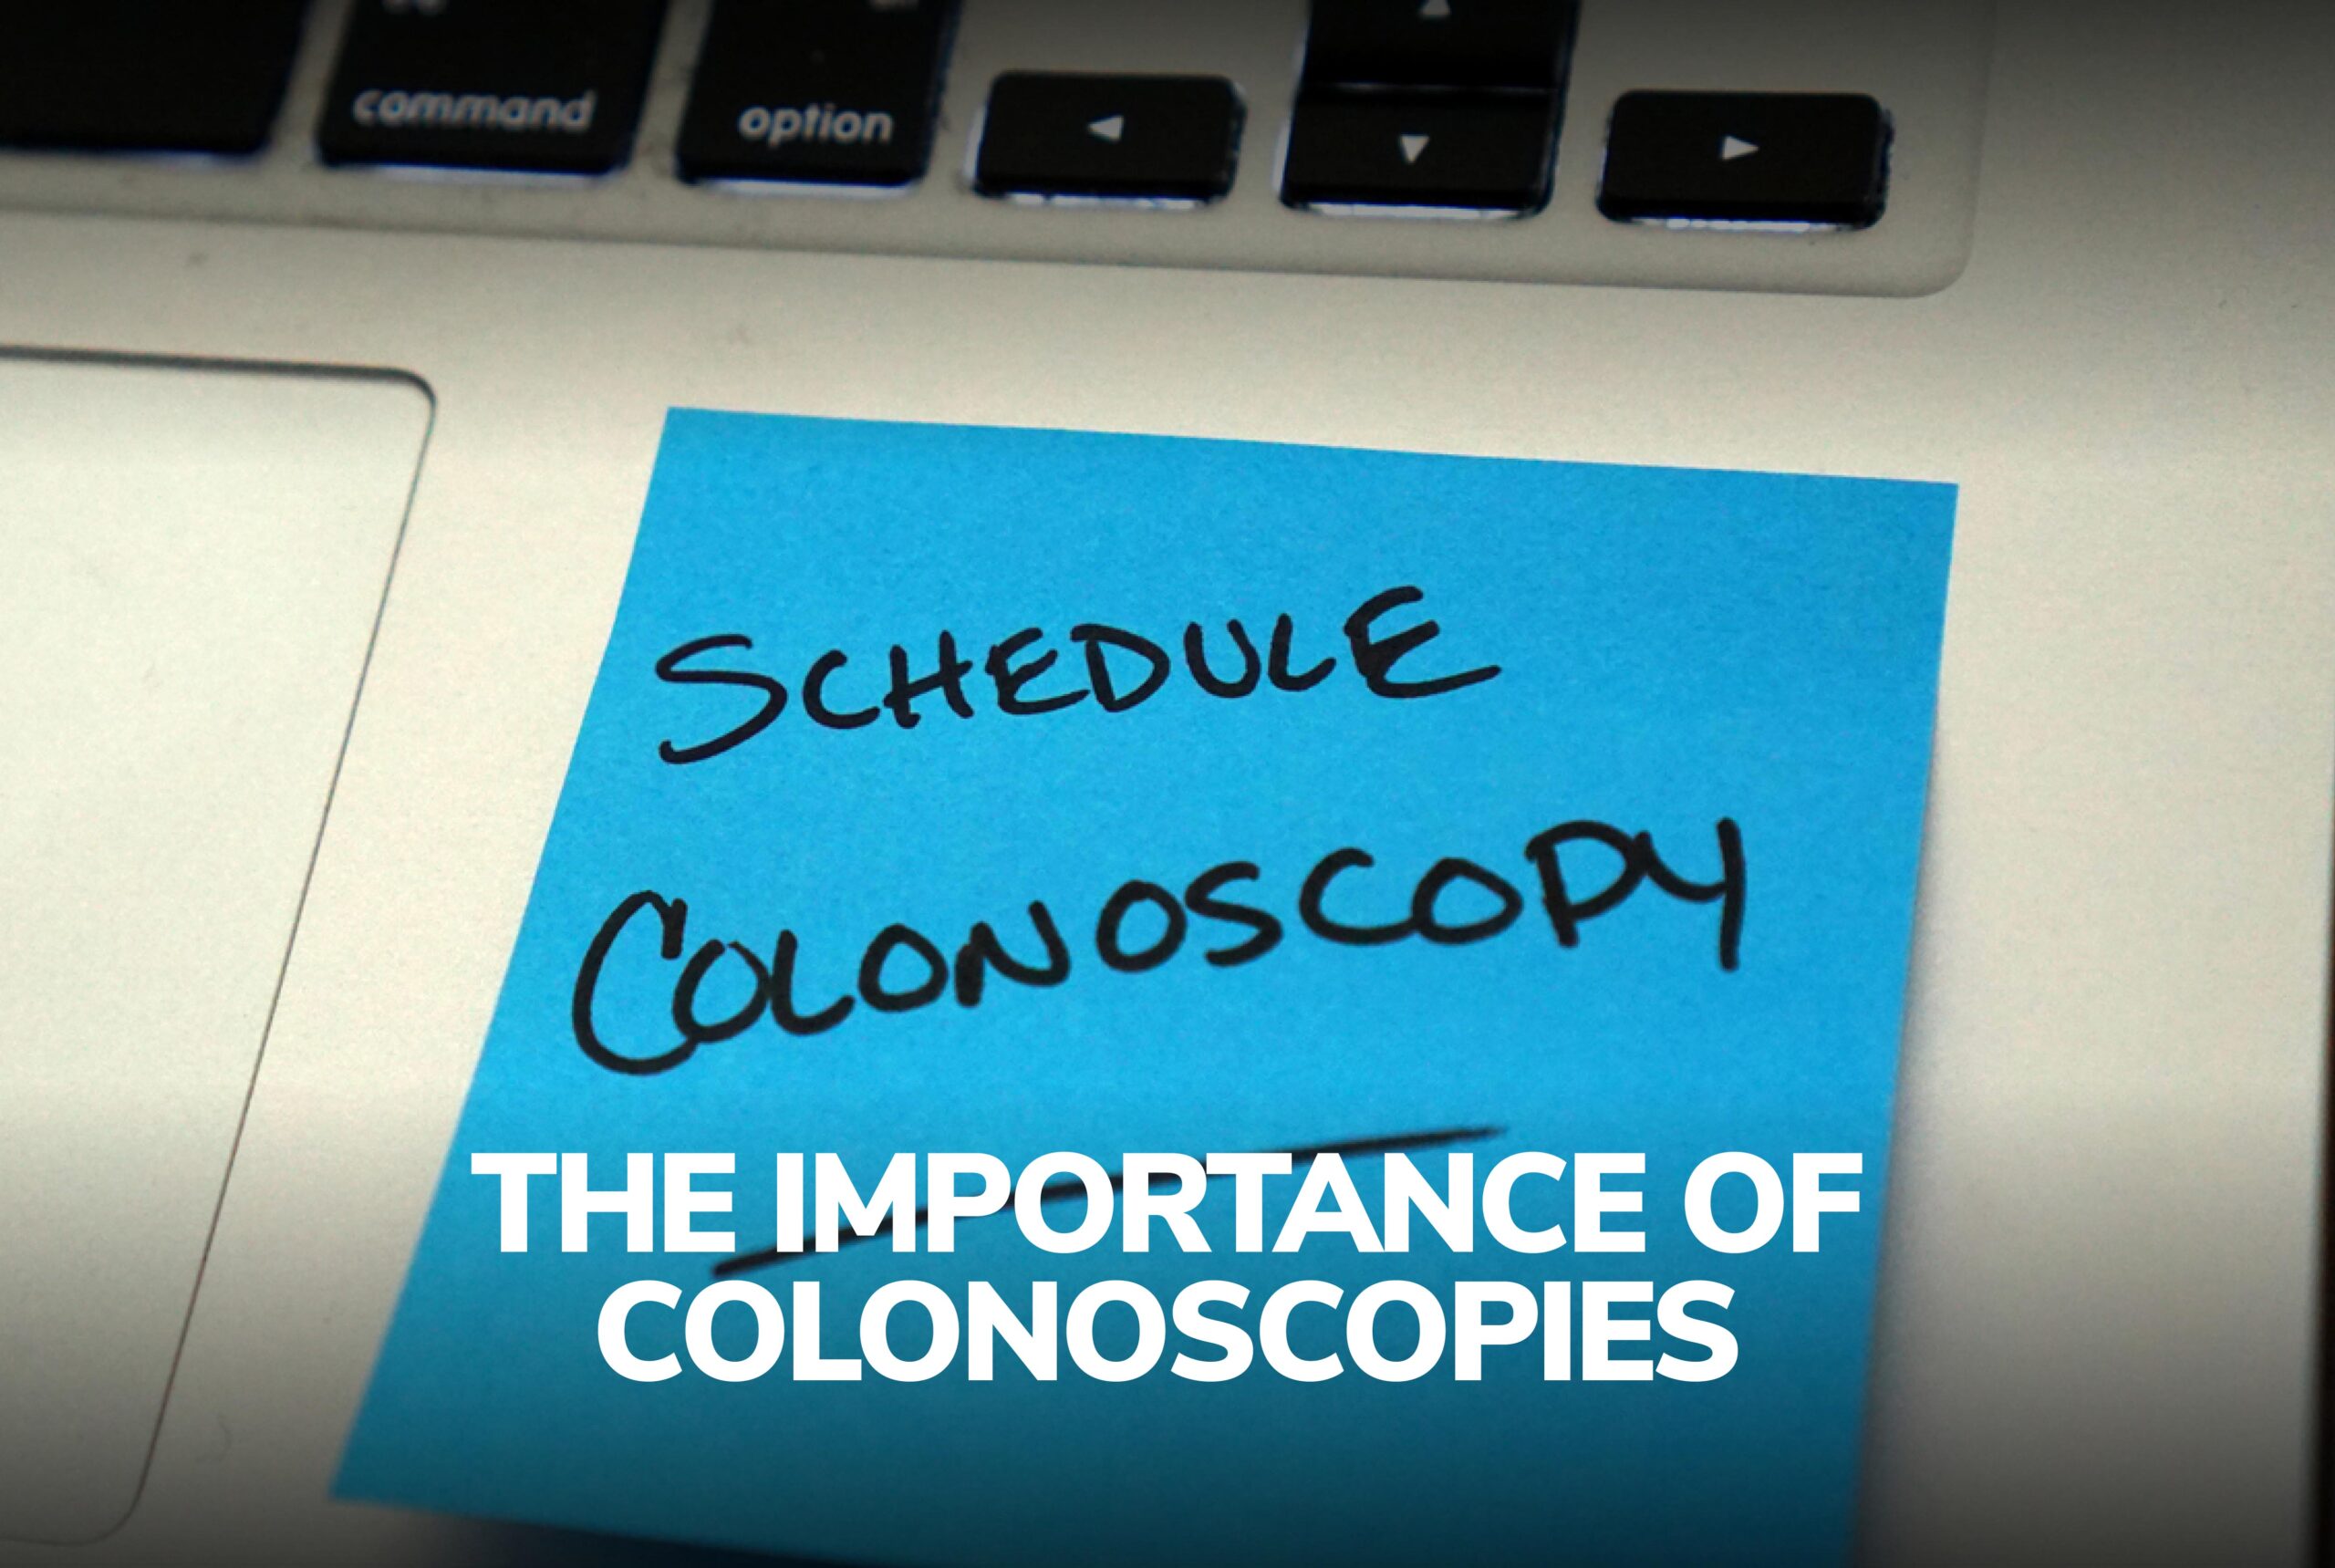 The Importance of Colonoscopies